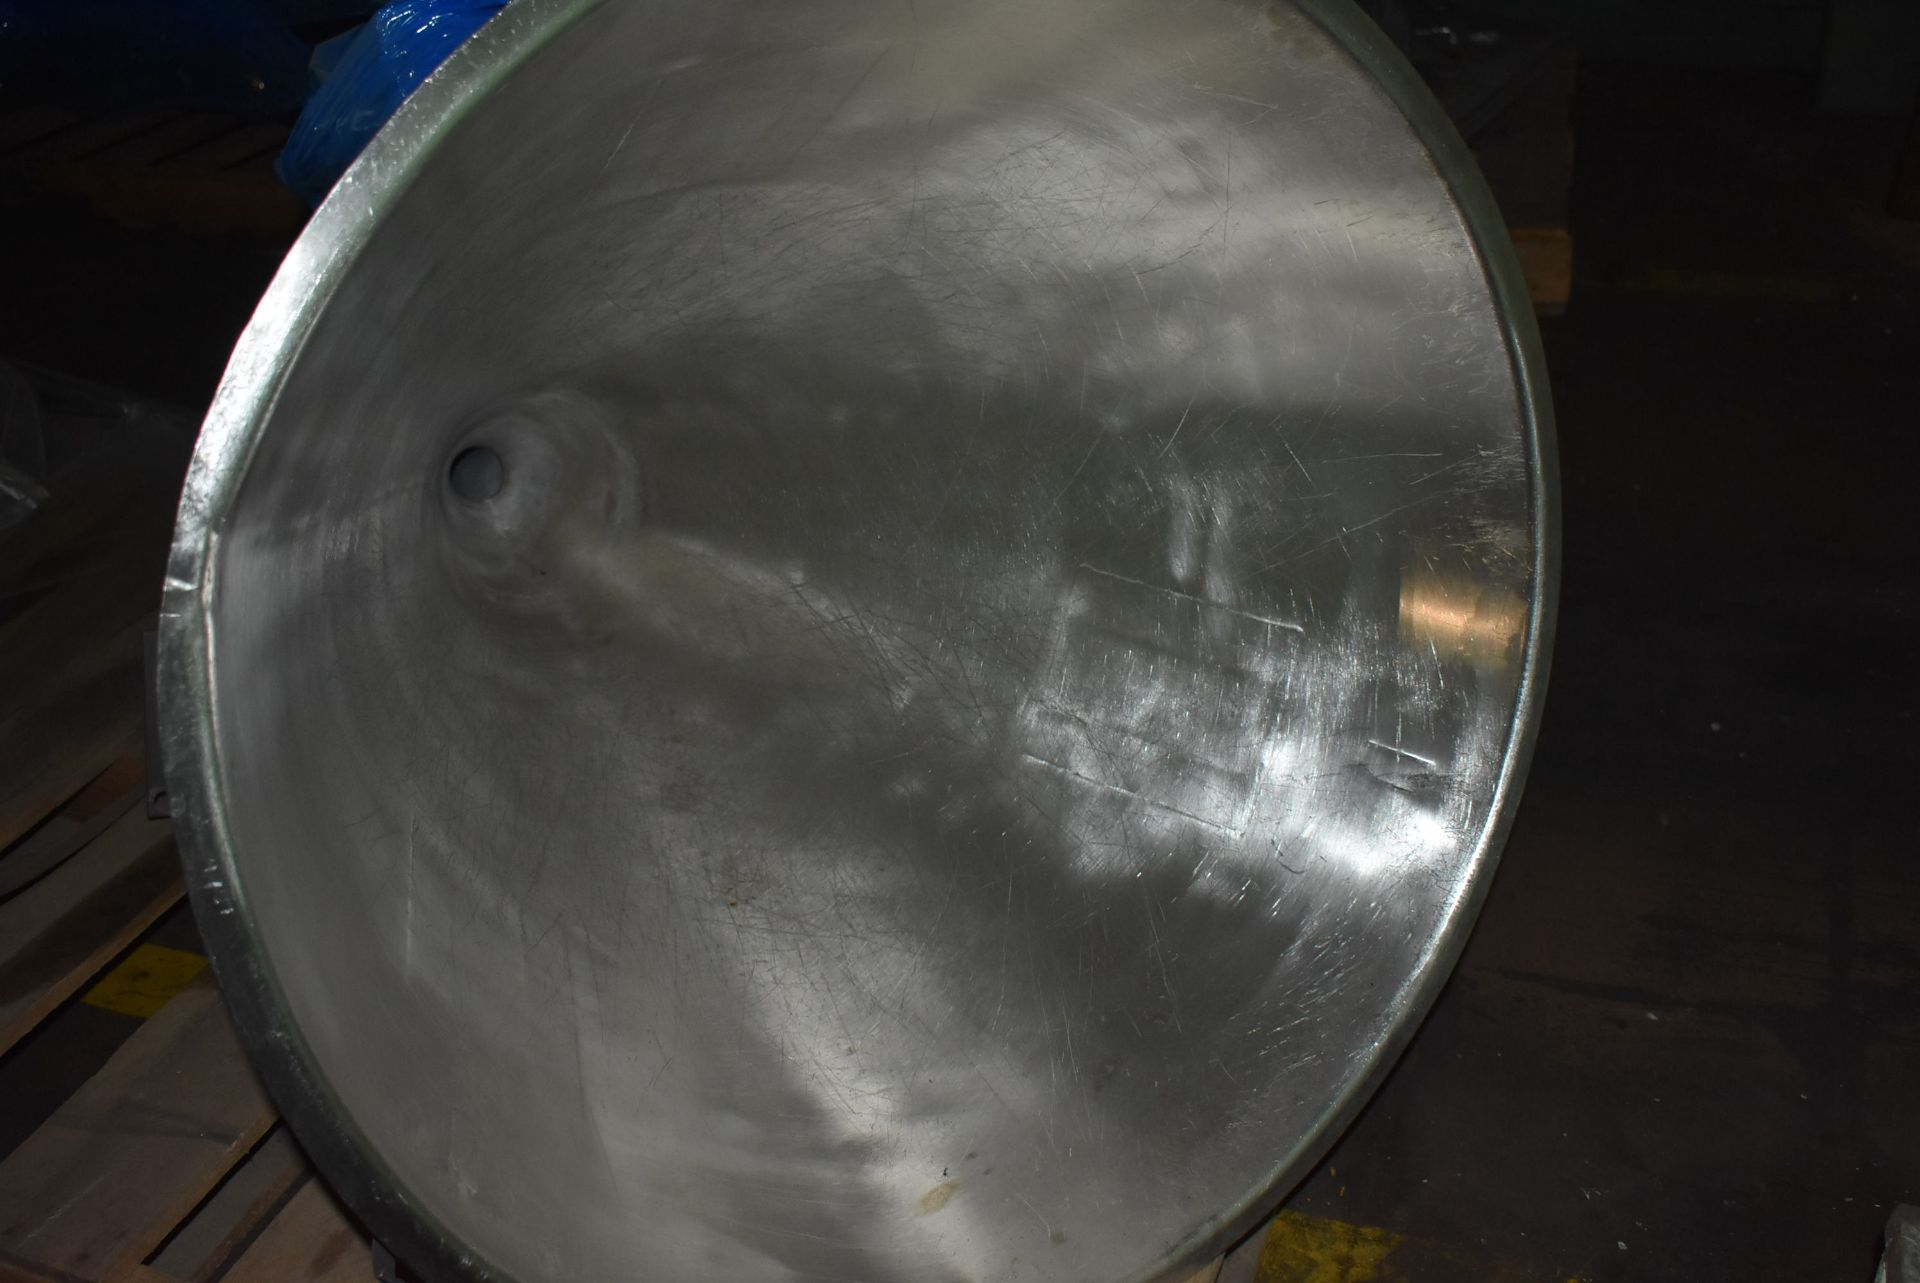 Stainless Steel Hopper, 30" Diameter at Top x 36" Top - Bottom - Image 2 of 2